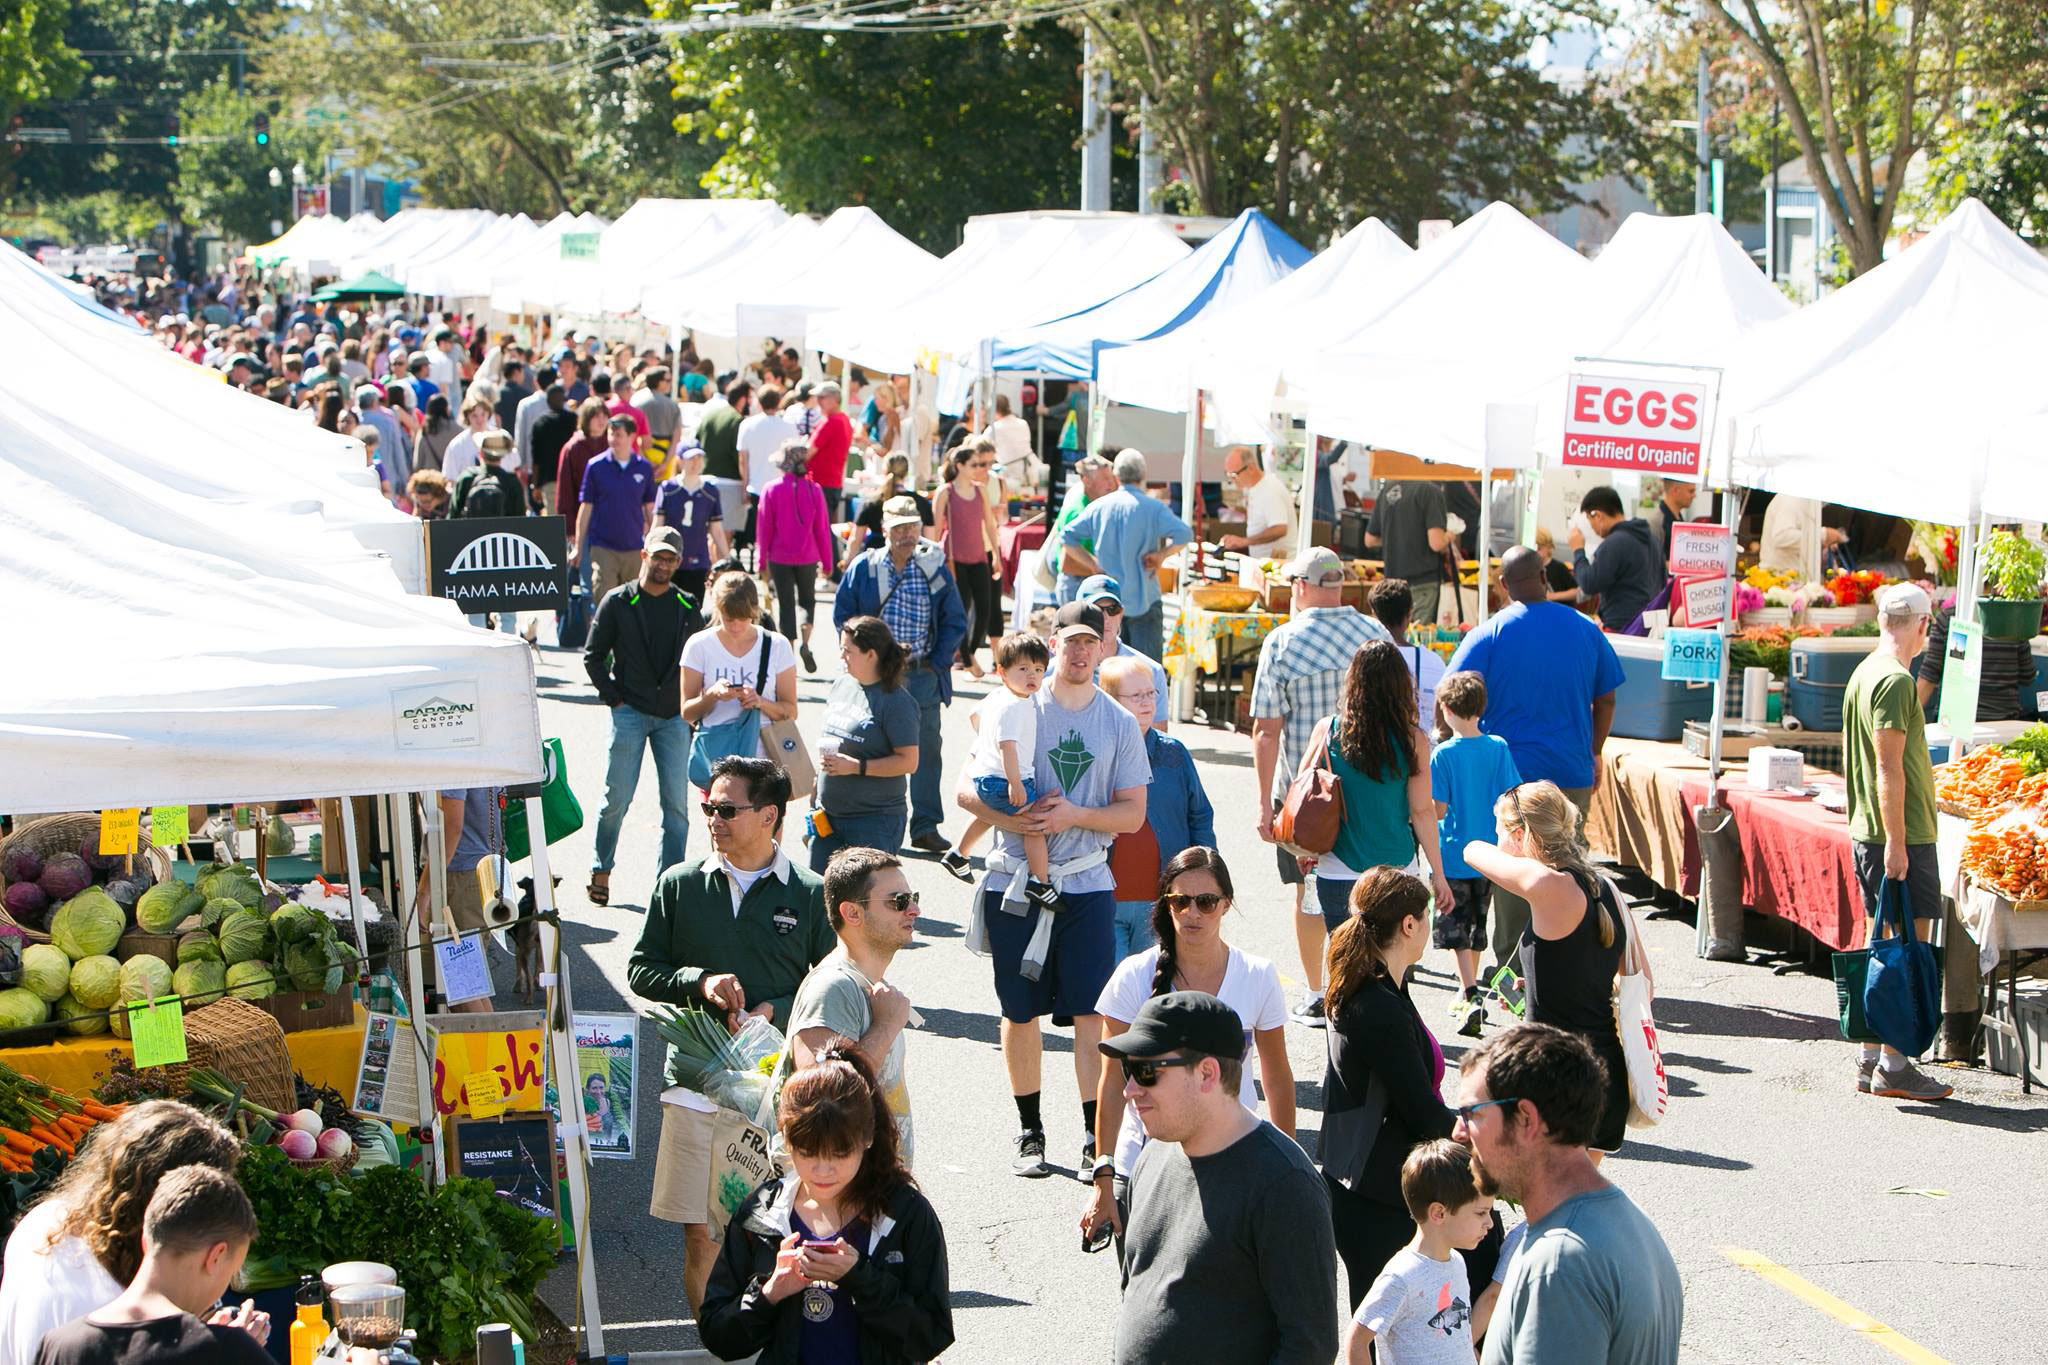 People pack the Ave in the U District during a sunny day at the farmers market.